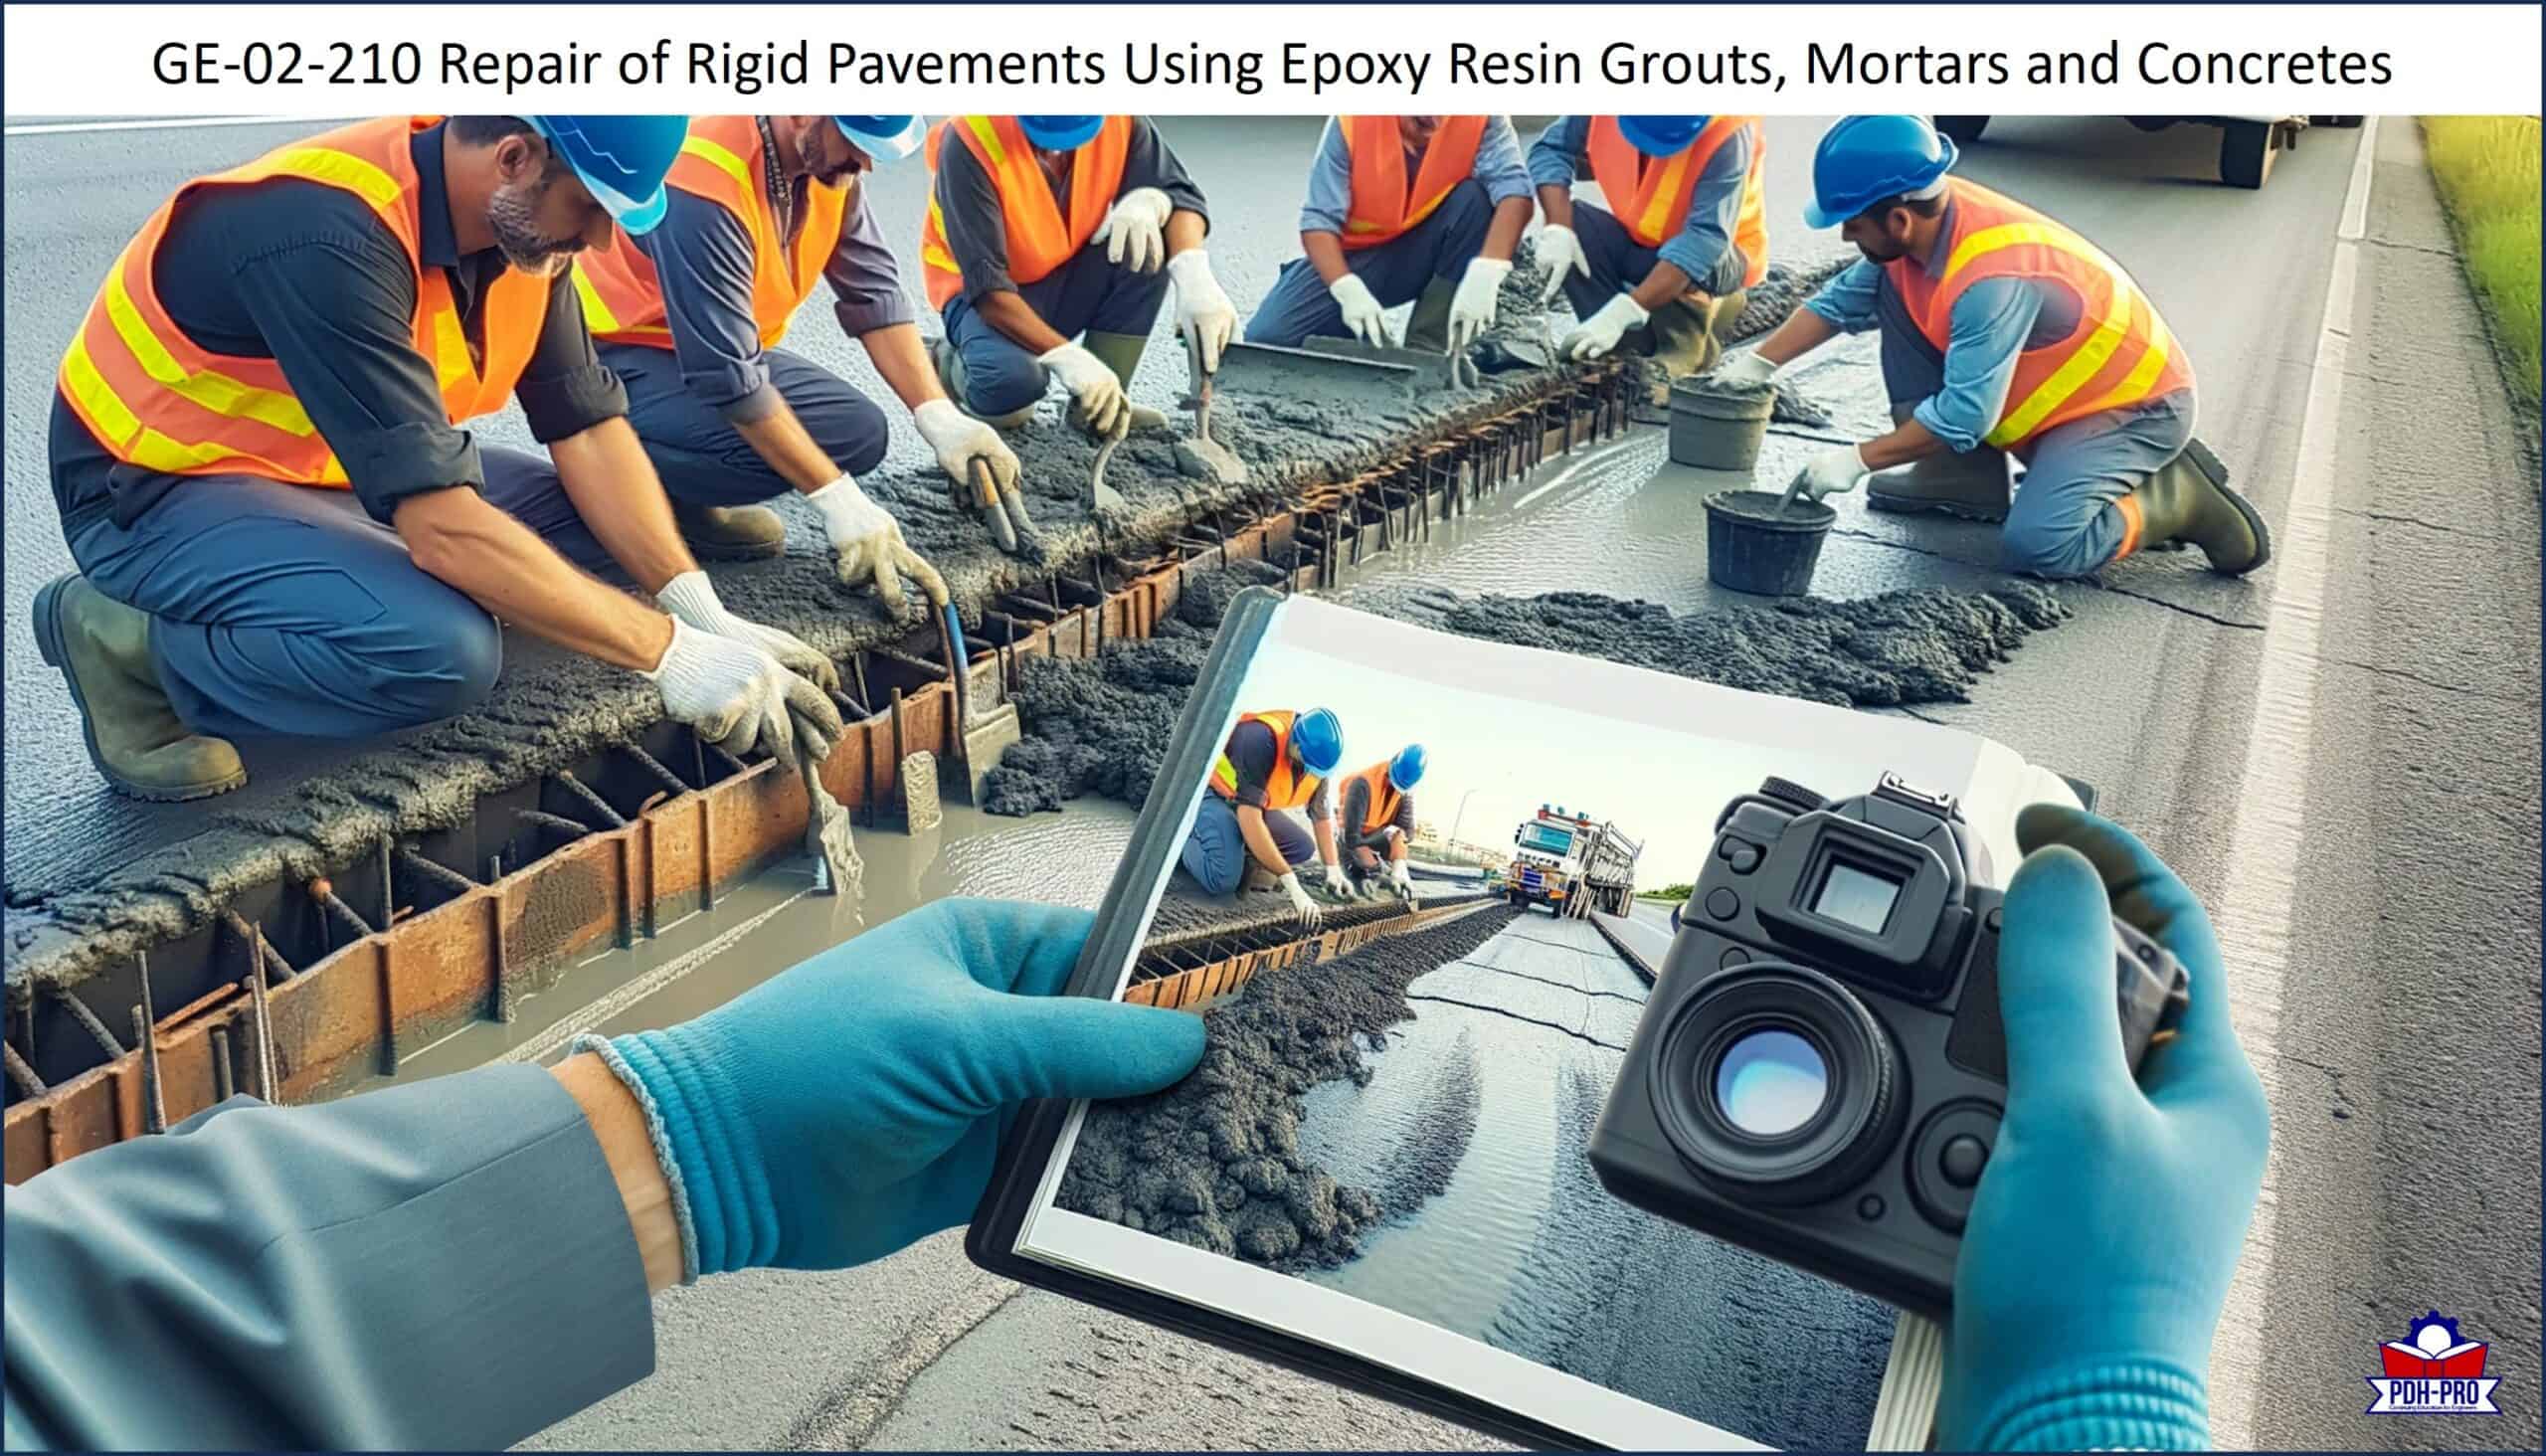 Repair of Rigid Pavements Using Epoxy Resin Grouts, Mortars and Concretes